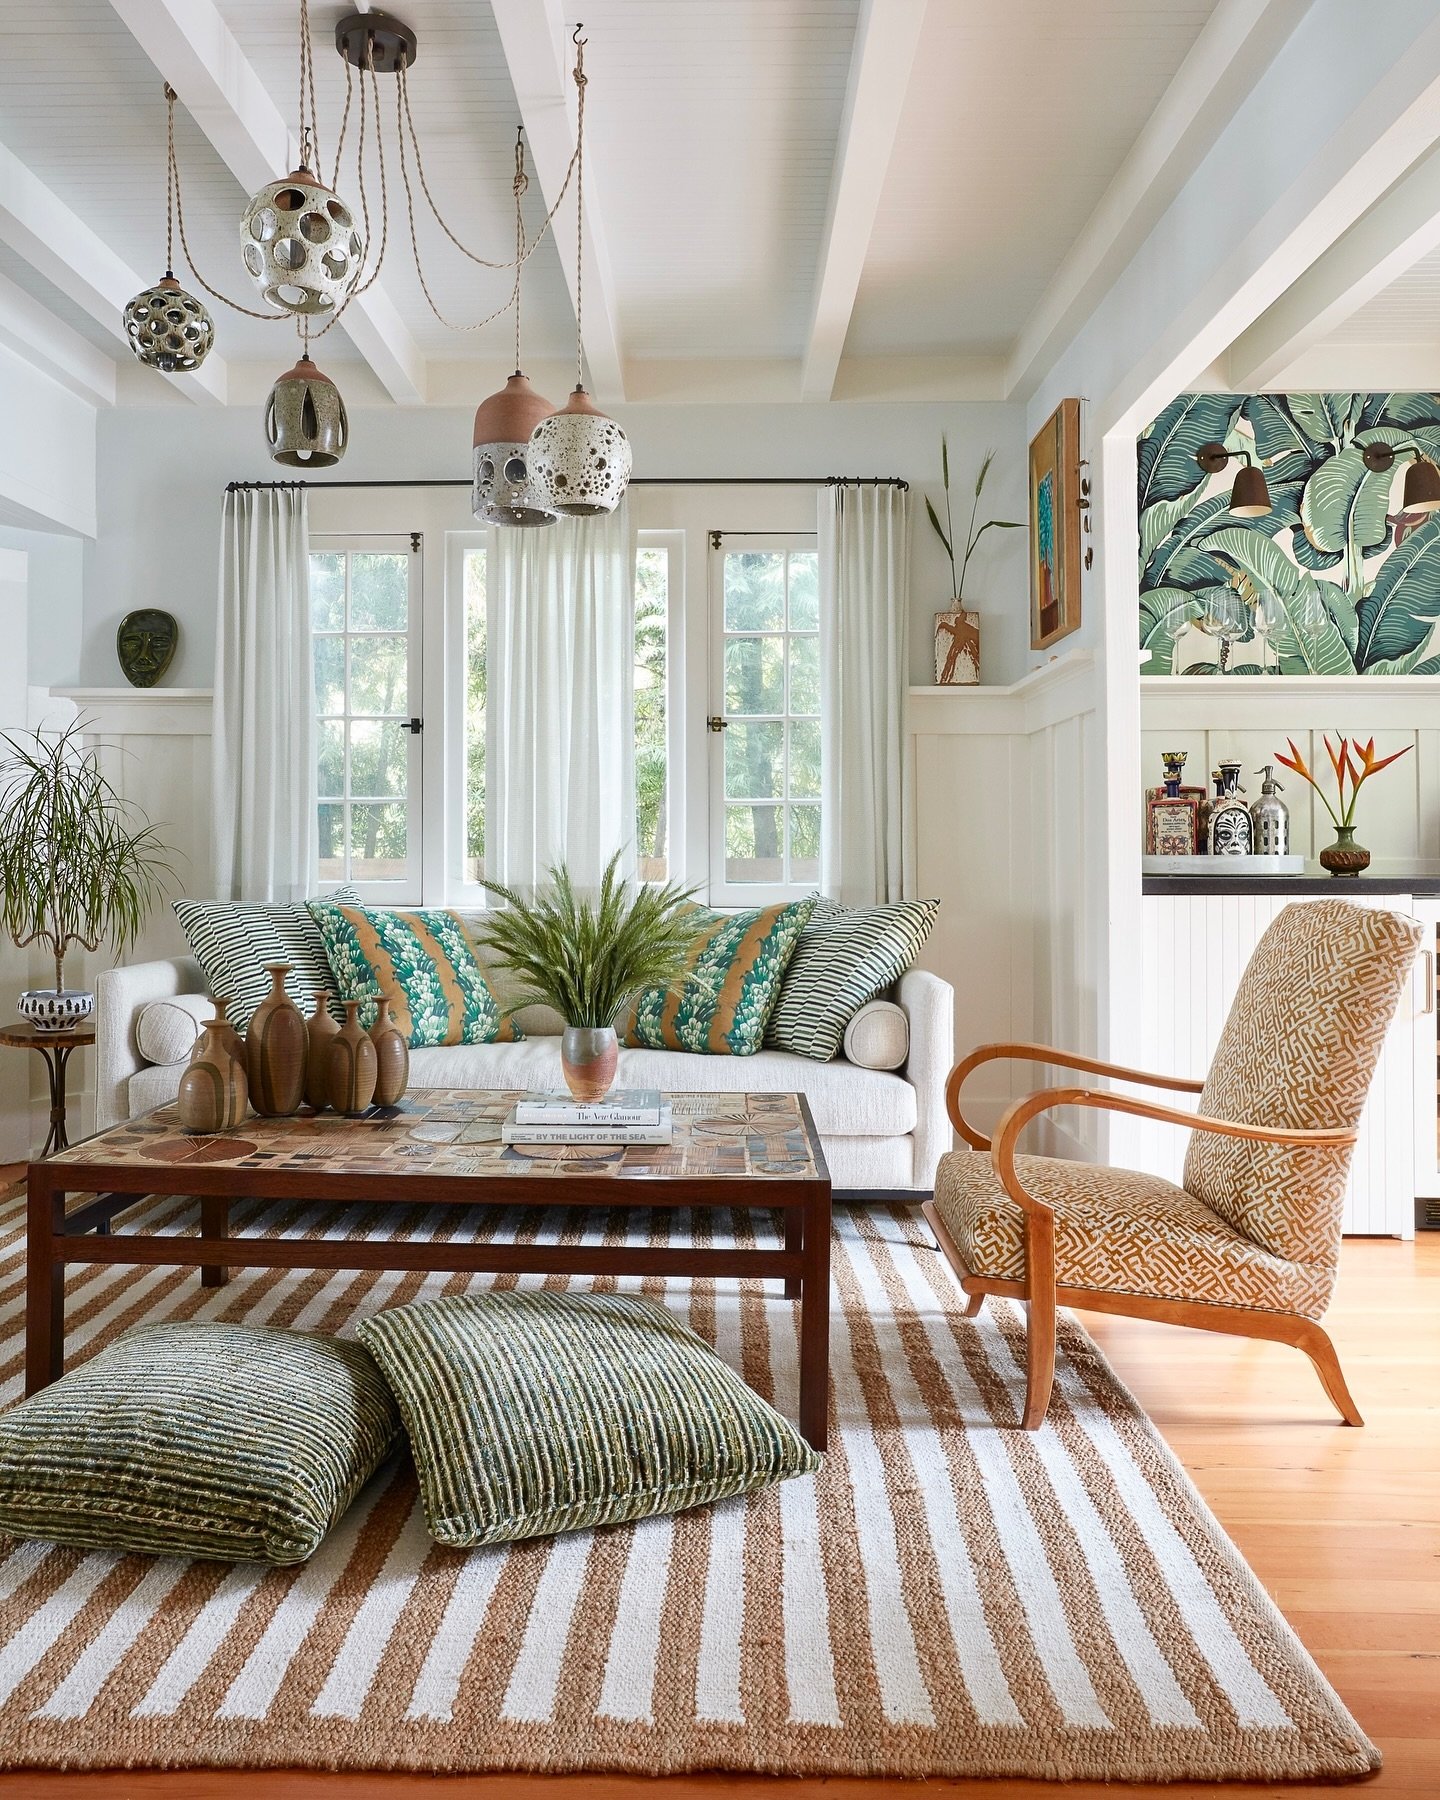 Starting to get Summer vibes! 

As seen in @housebeautiful 
Photo @stephenbuskenstudio

#summervibes